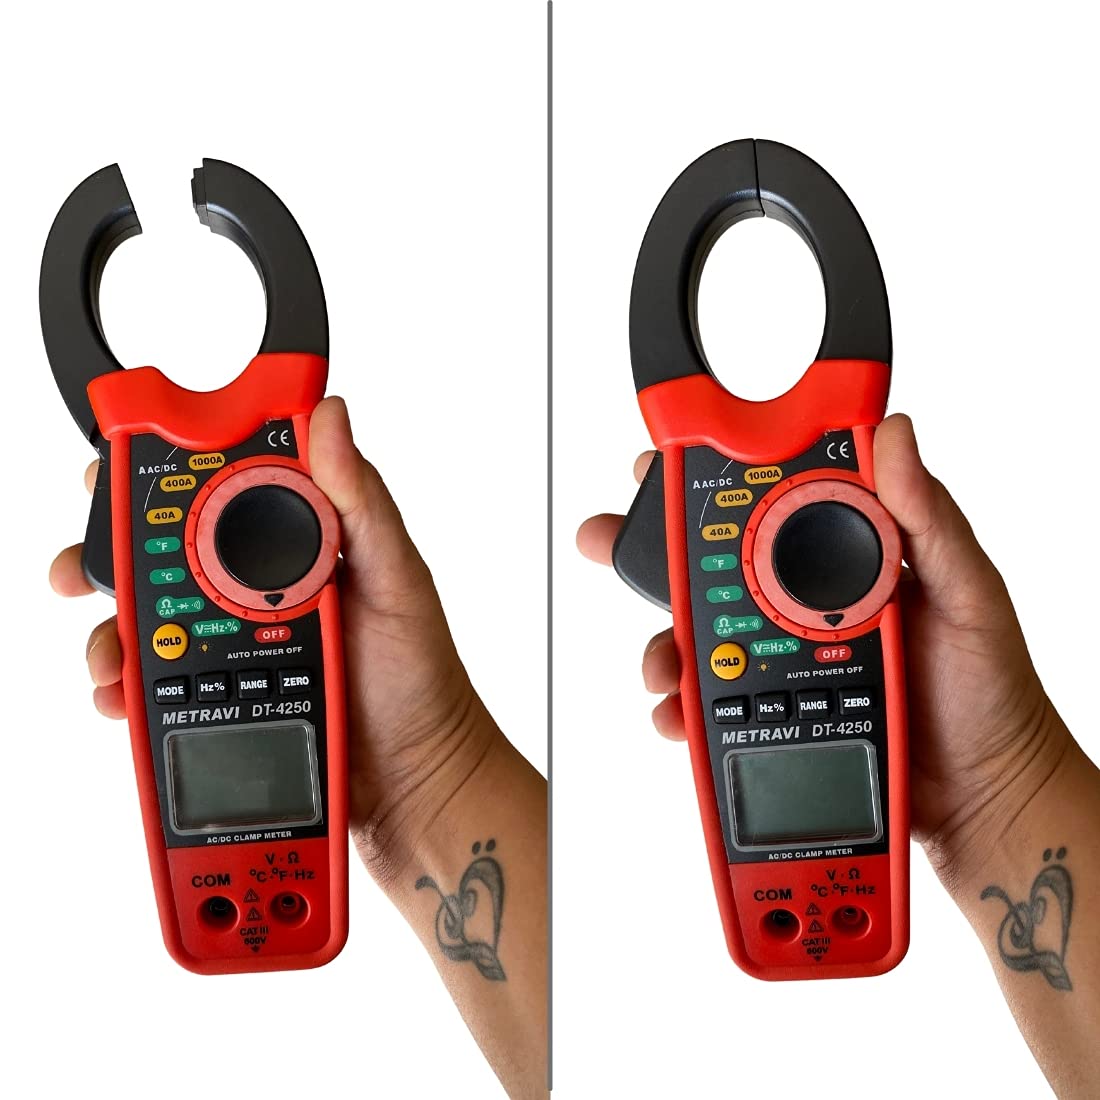 Metravi DT-4250 Digital AC/DC Clamp Meter with 30mm Jaw Size, for up to 1000A